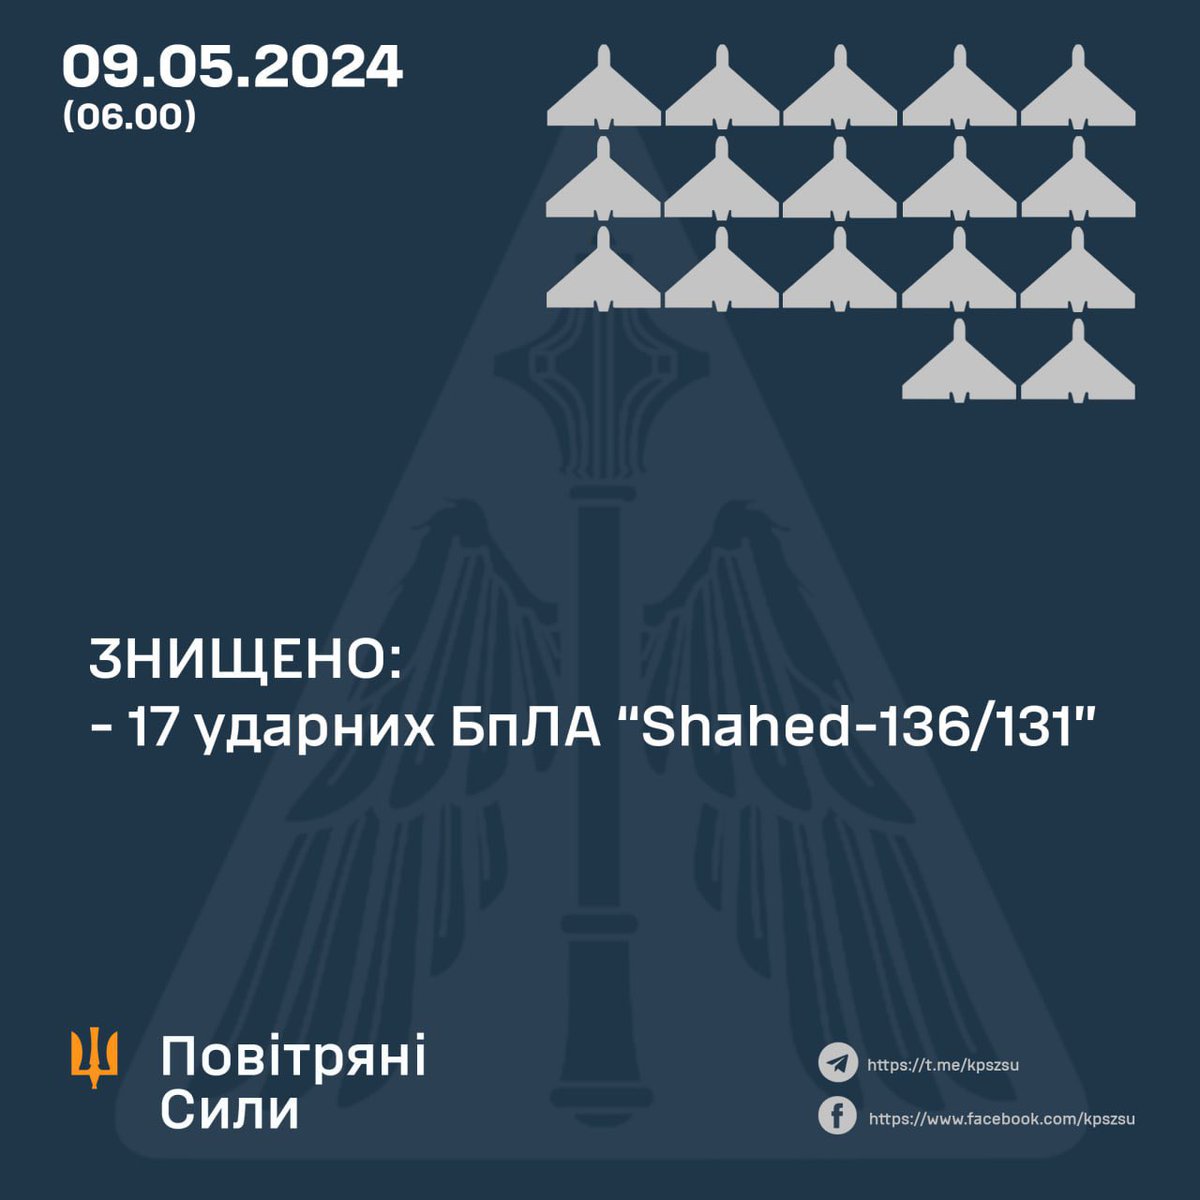 As a result of combat operations, anti-aircraft missile units of the Air Force and mobile firing groups of the Ukrainian Defense Forces destroyed 17 out of 20 attack UAVs #Shahed type in #Odesa region 🦾🇺🇦🇺🇦🇺🇦